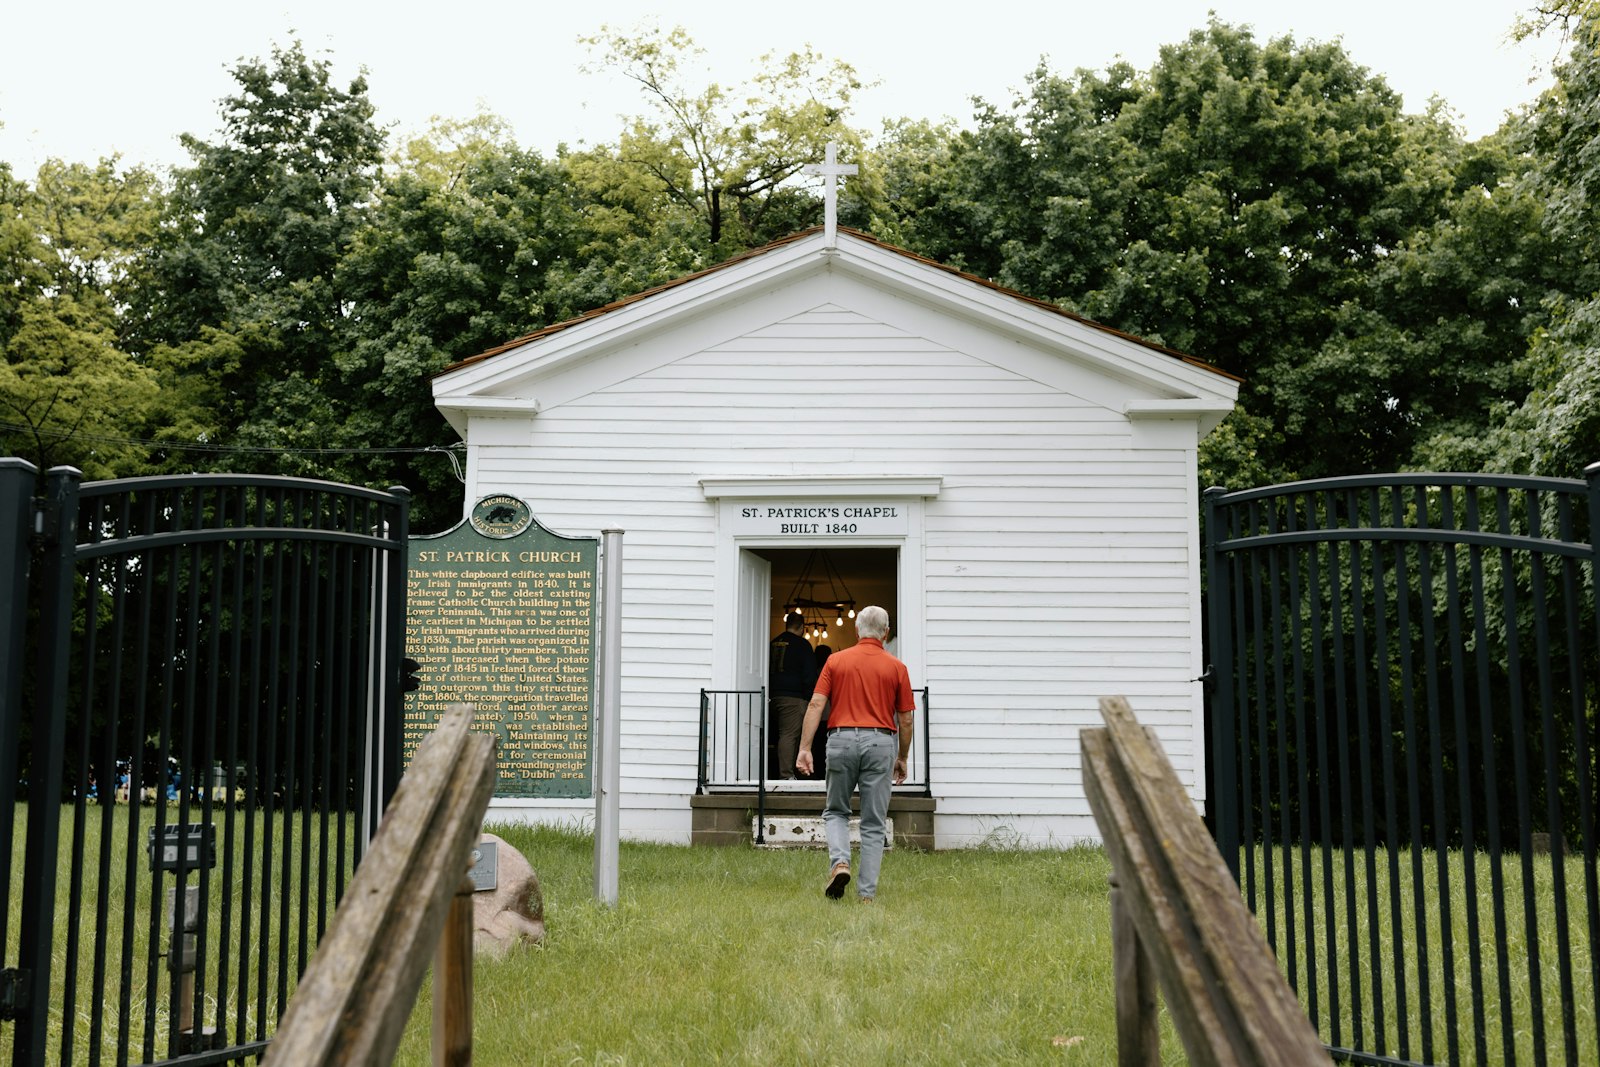 Parishioners of St. Patrick Parish in White Lake file into the small chapel across Union Lake Road for Mass on Memorial Day, May 27, one of two Masses the parish holds each year in the historic chapel.